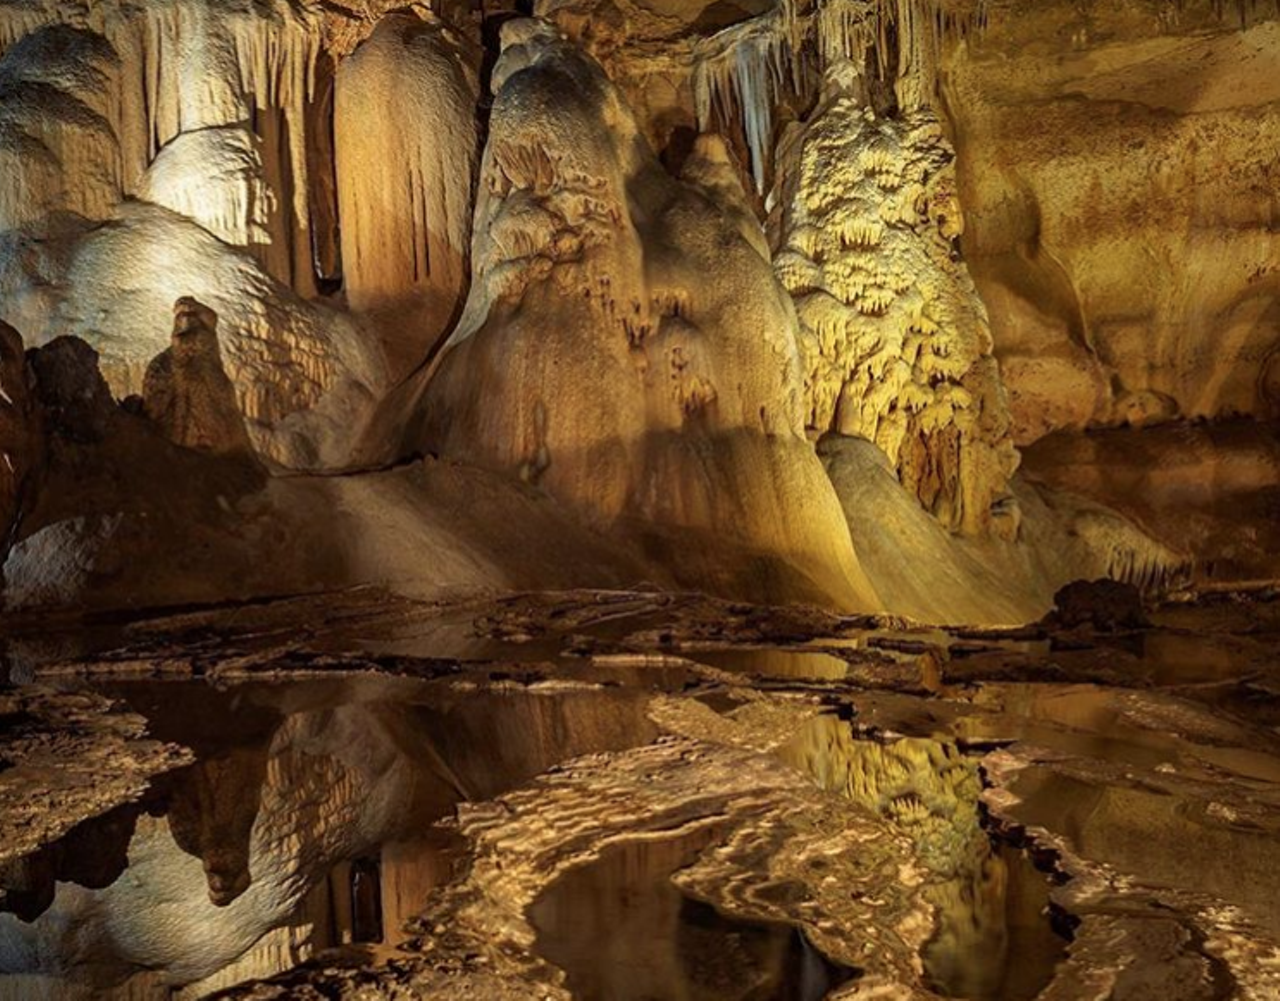 Explore the Cave Without a Name
325 Kreutzberg Rd, Boerne, (830) 537-4212, cavewithoutaname.com
Just a hop, skip and jump away you’ll find probably the coolest cave in Texas. Made of a limestone solution, you and your crew will be amazed by the natural wonder. Trust us, this should definitely be on your shortlist of adventures to be had.
Photo via Instagram / douggep